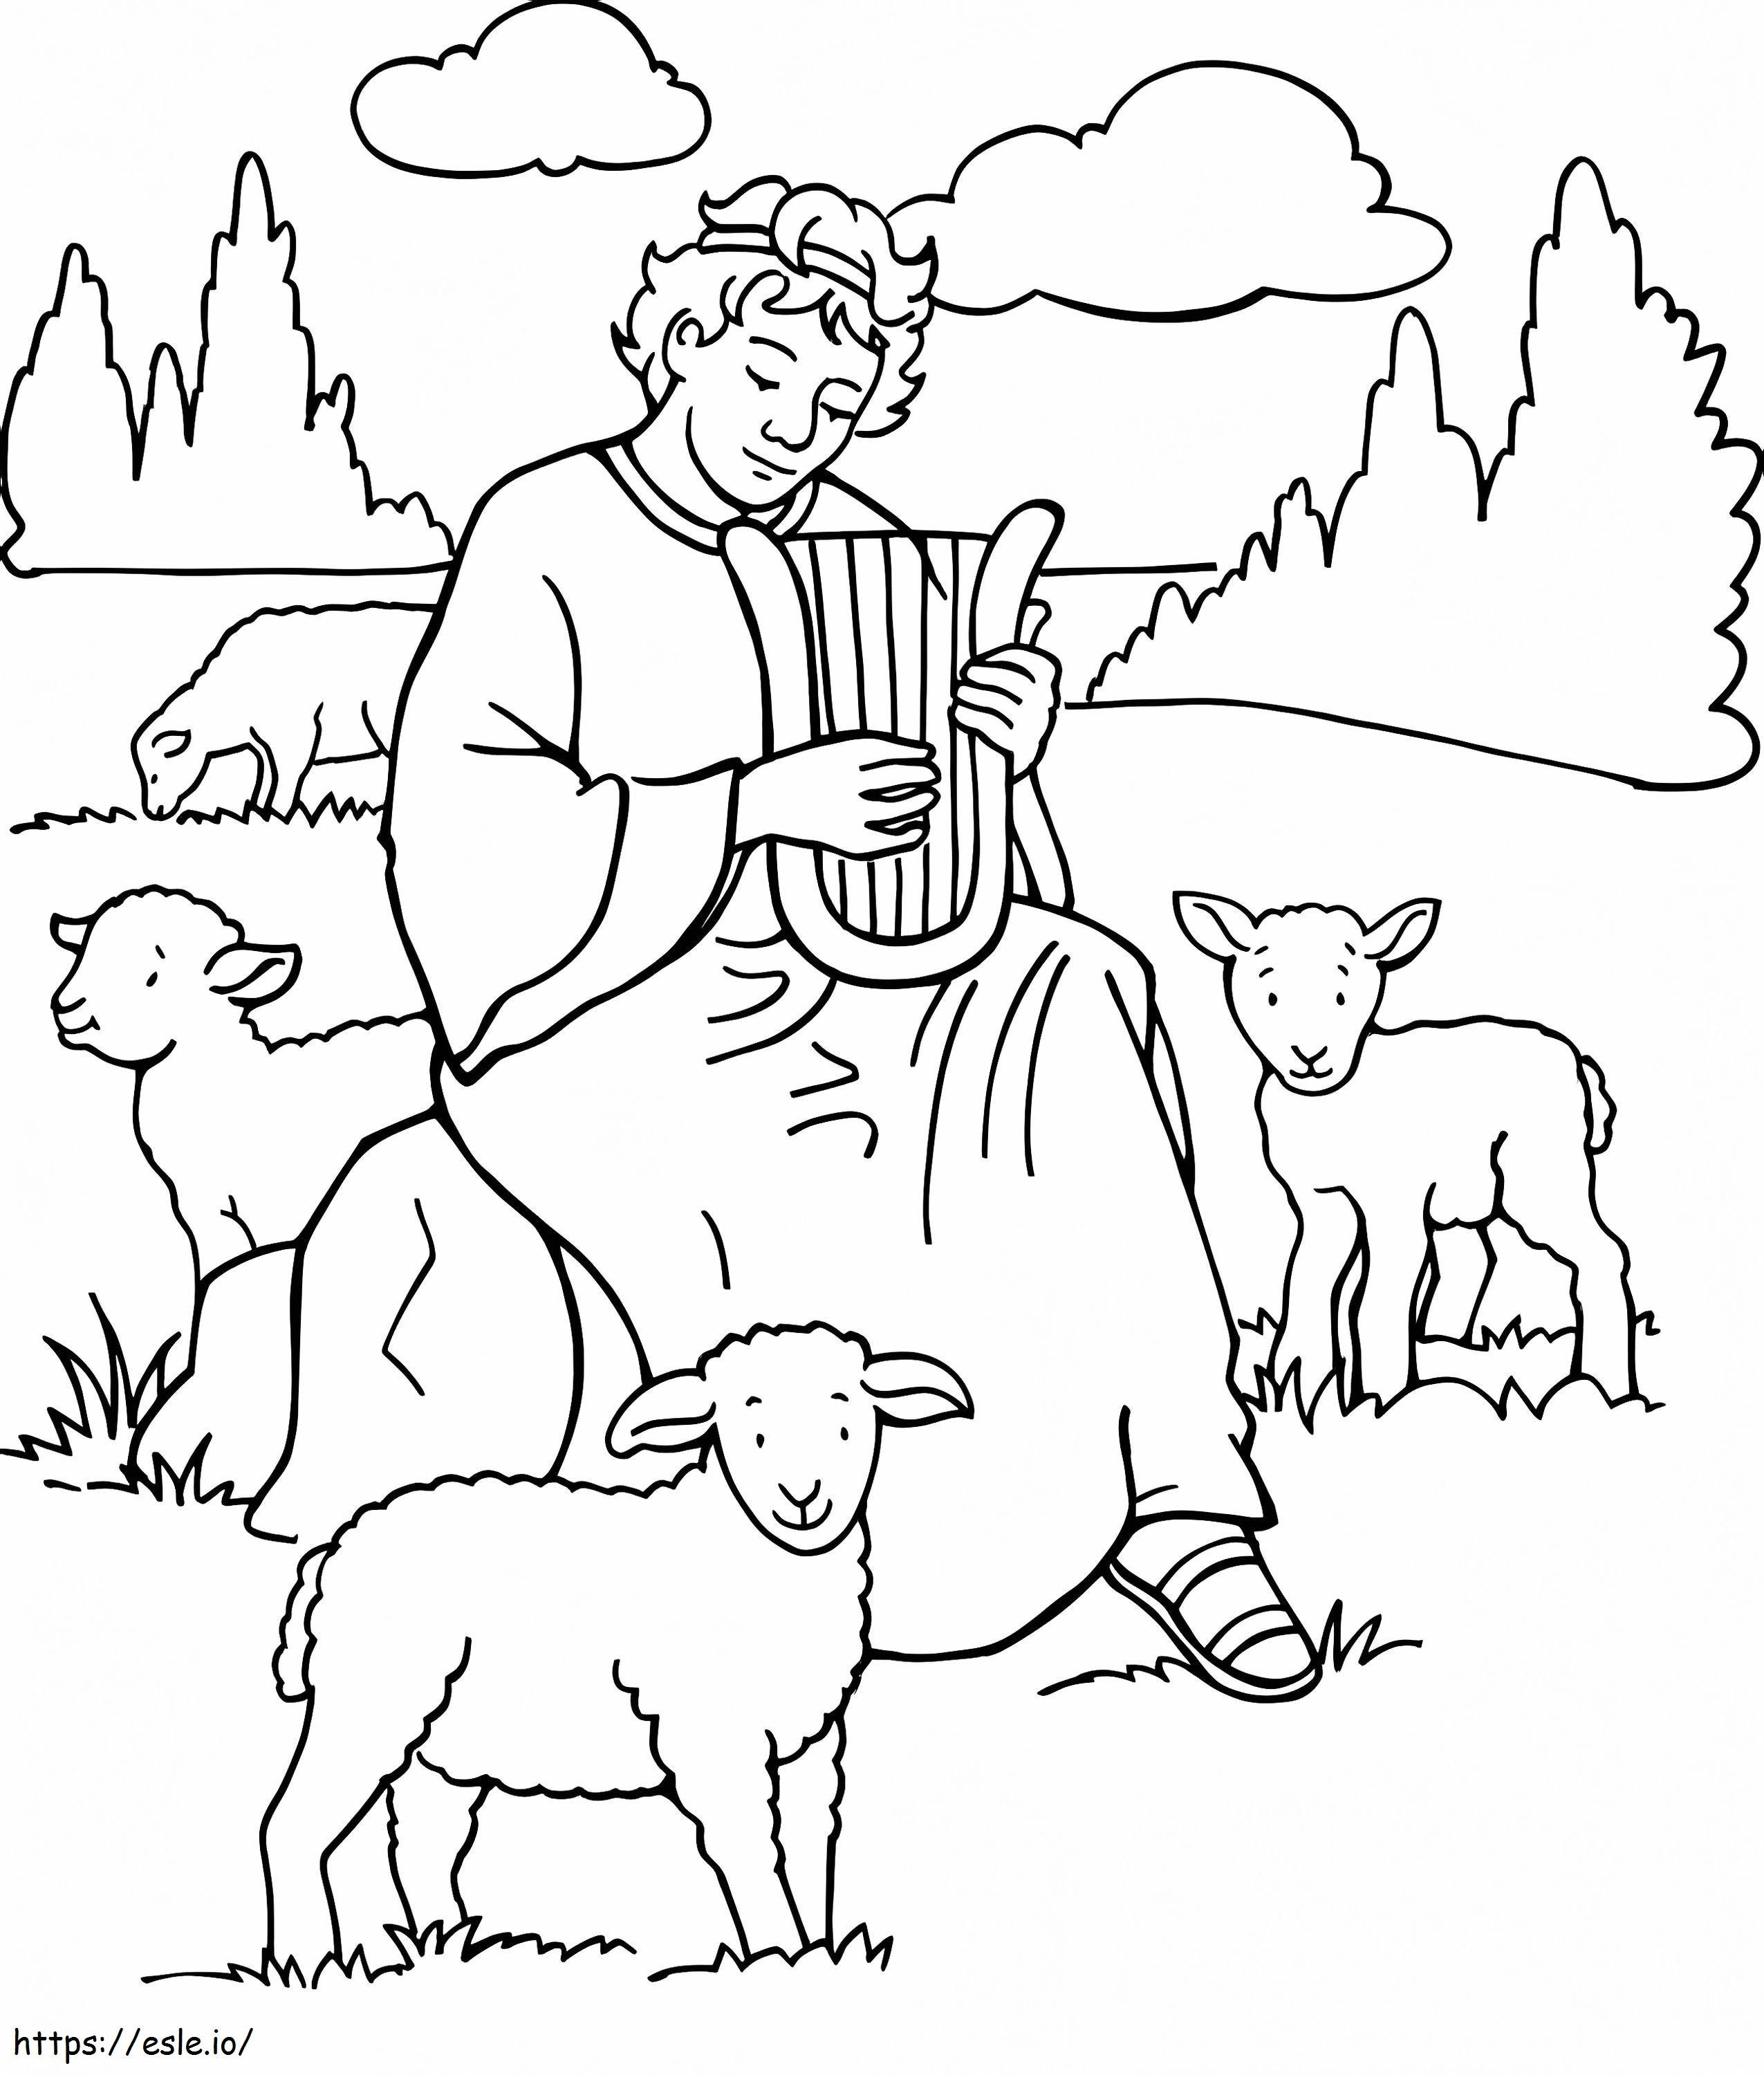 Playing Harp 5 coloring page